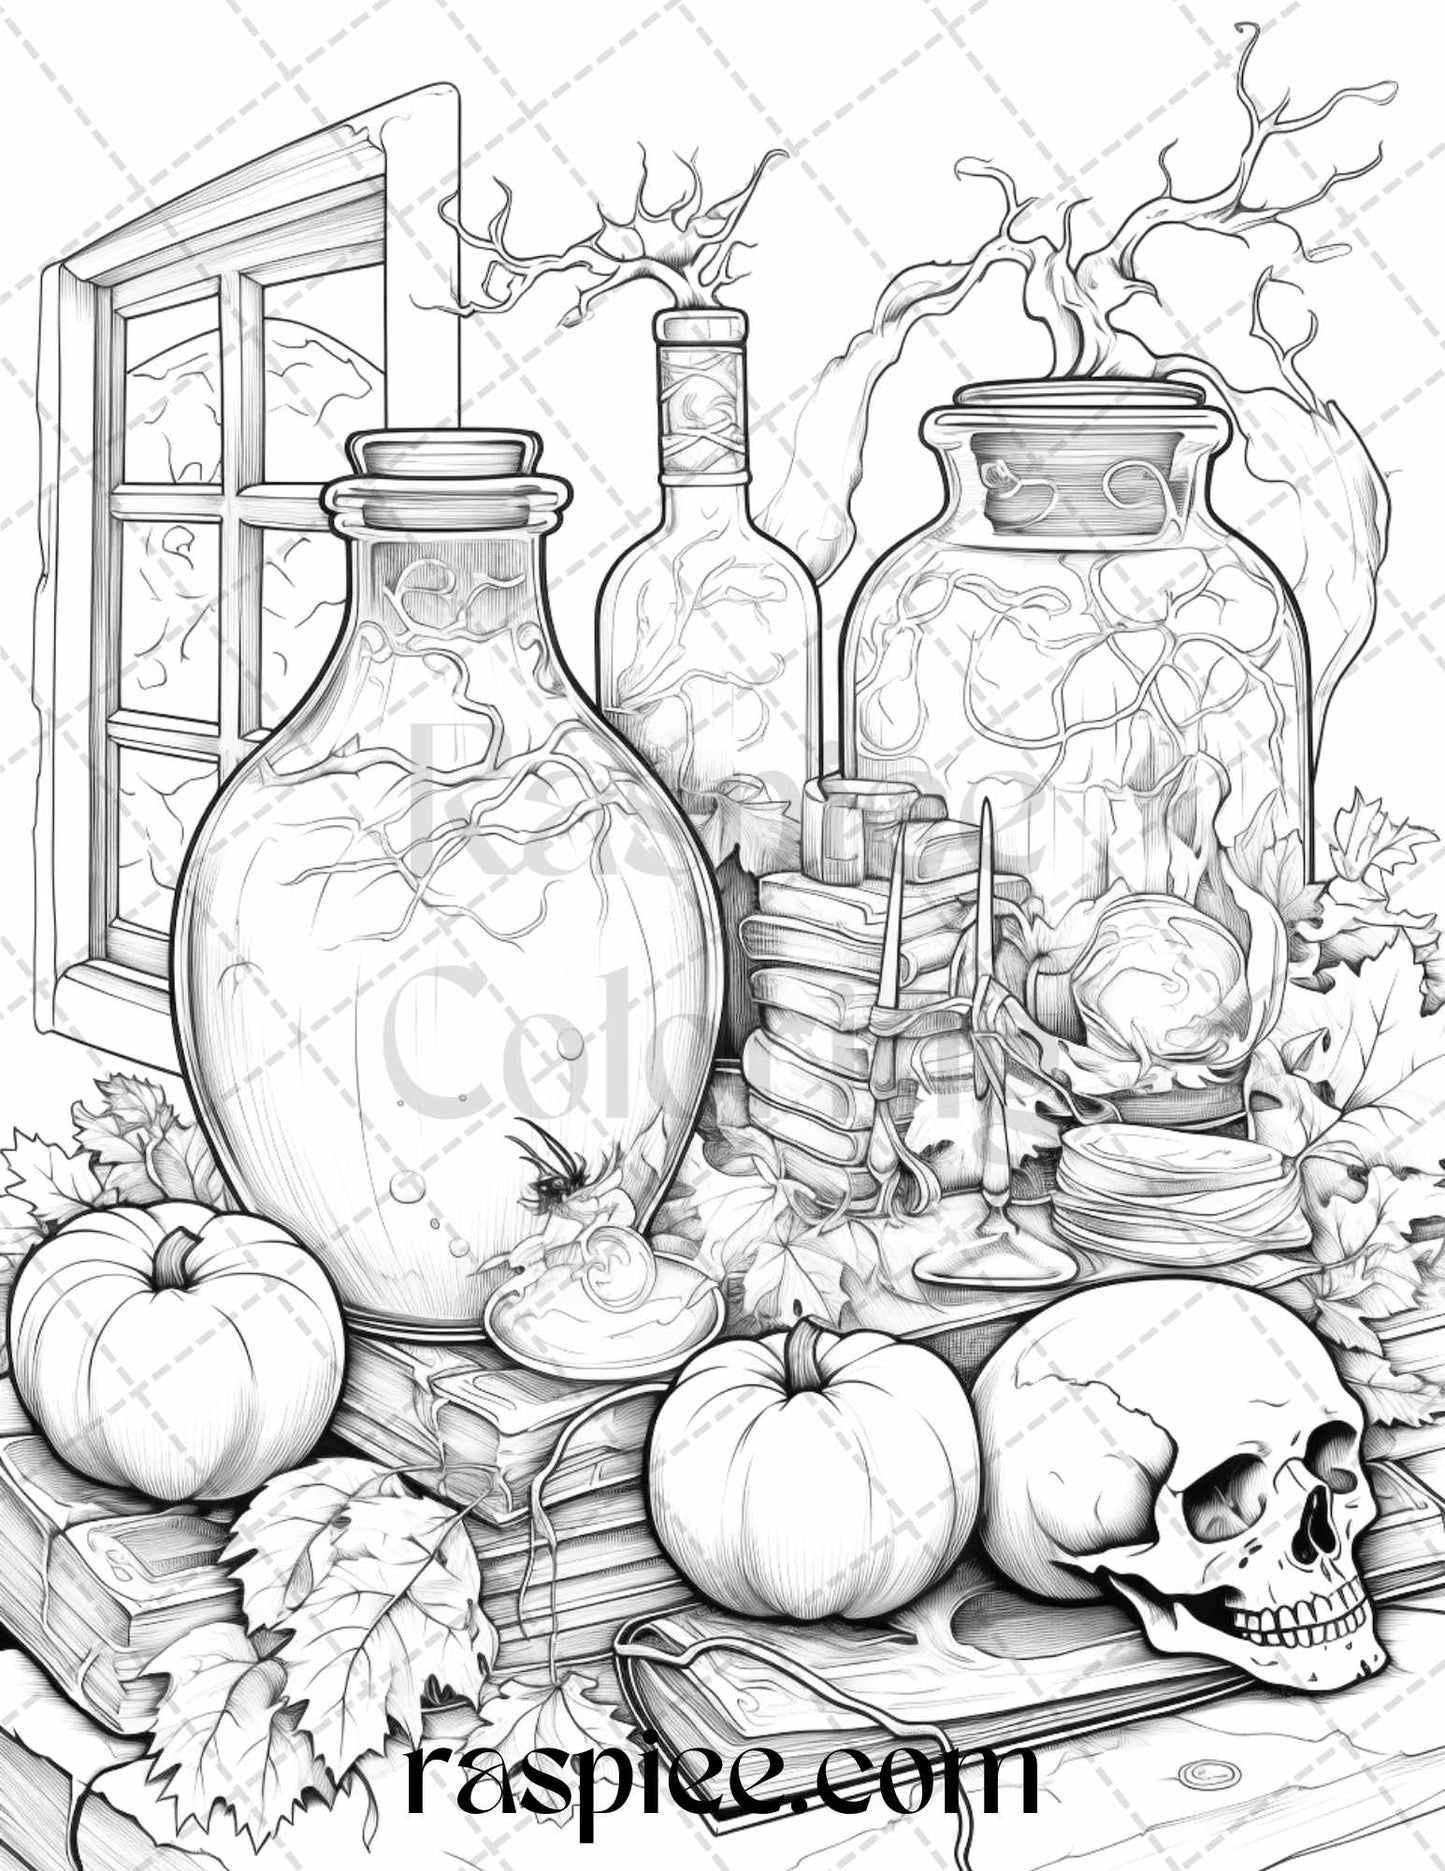 40 Mystical Magic Potions Grayscale Coloring Pages Printable for Adults, PDF File Instant Download - raspiee